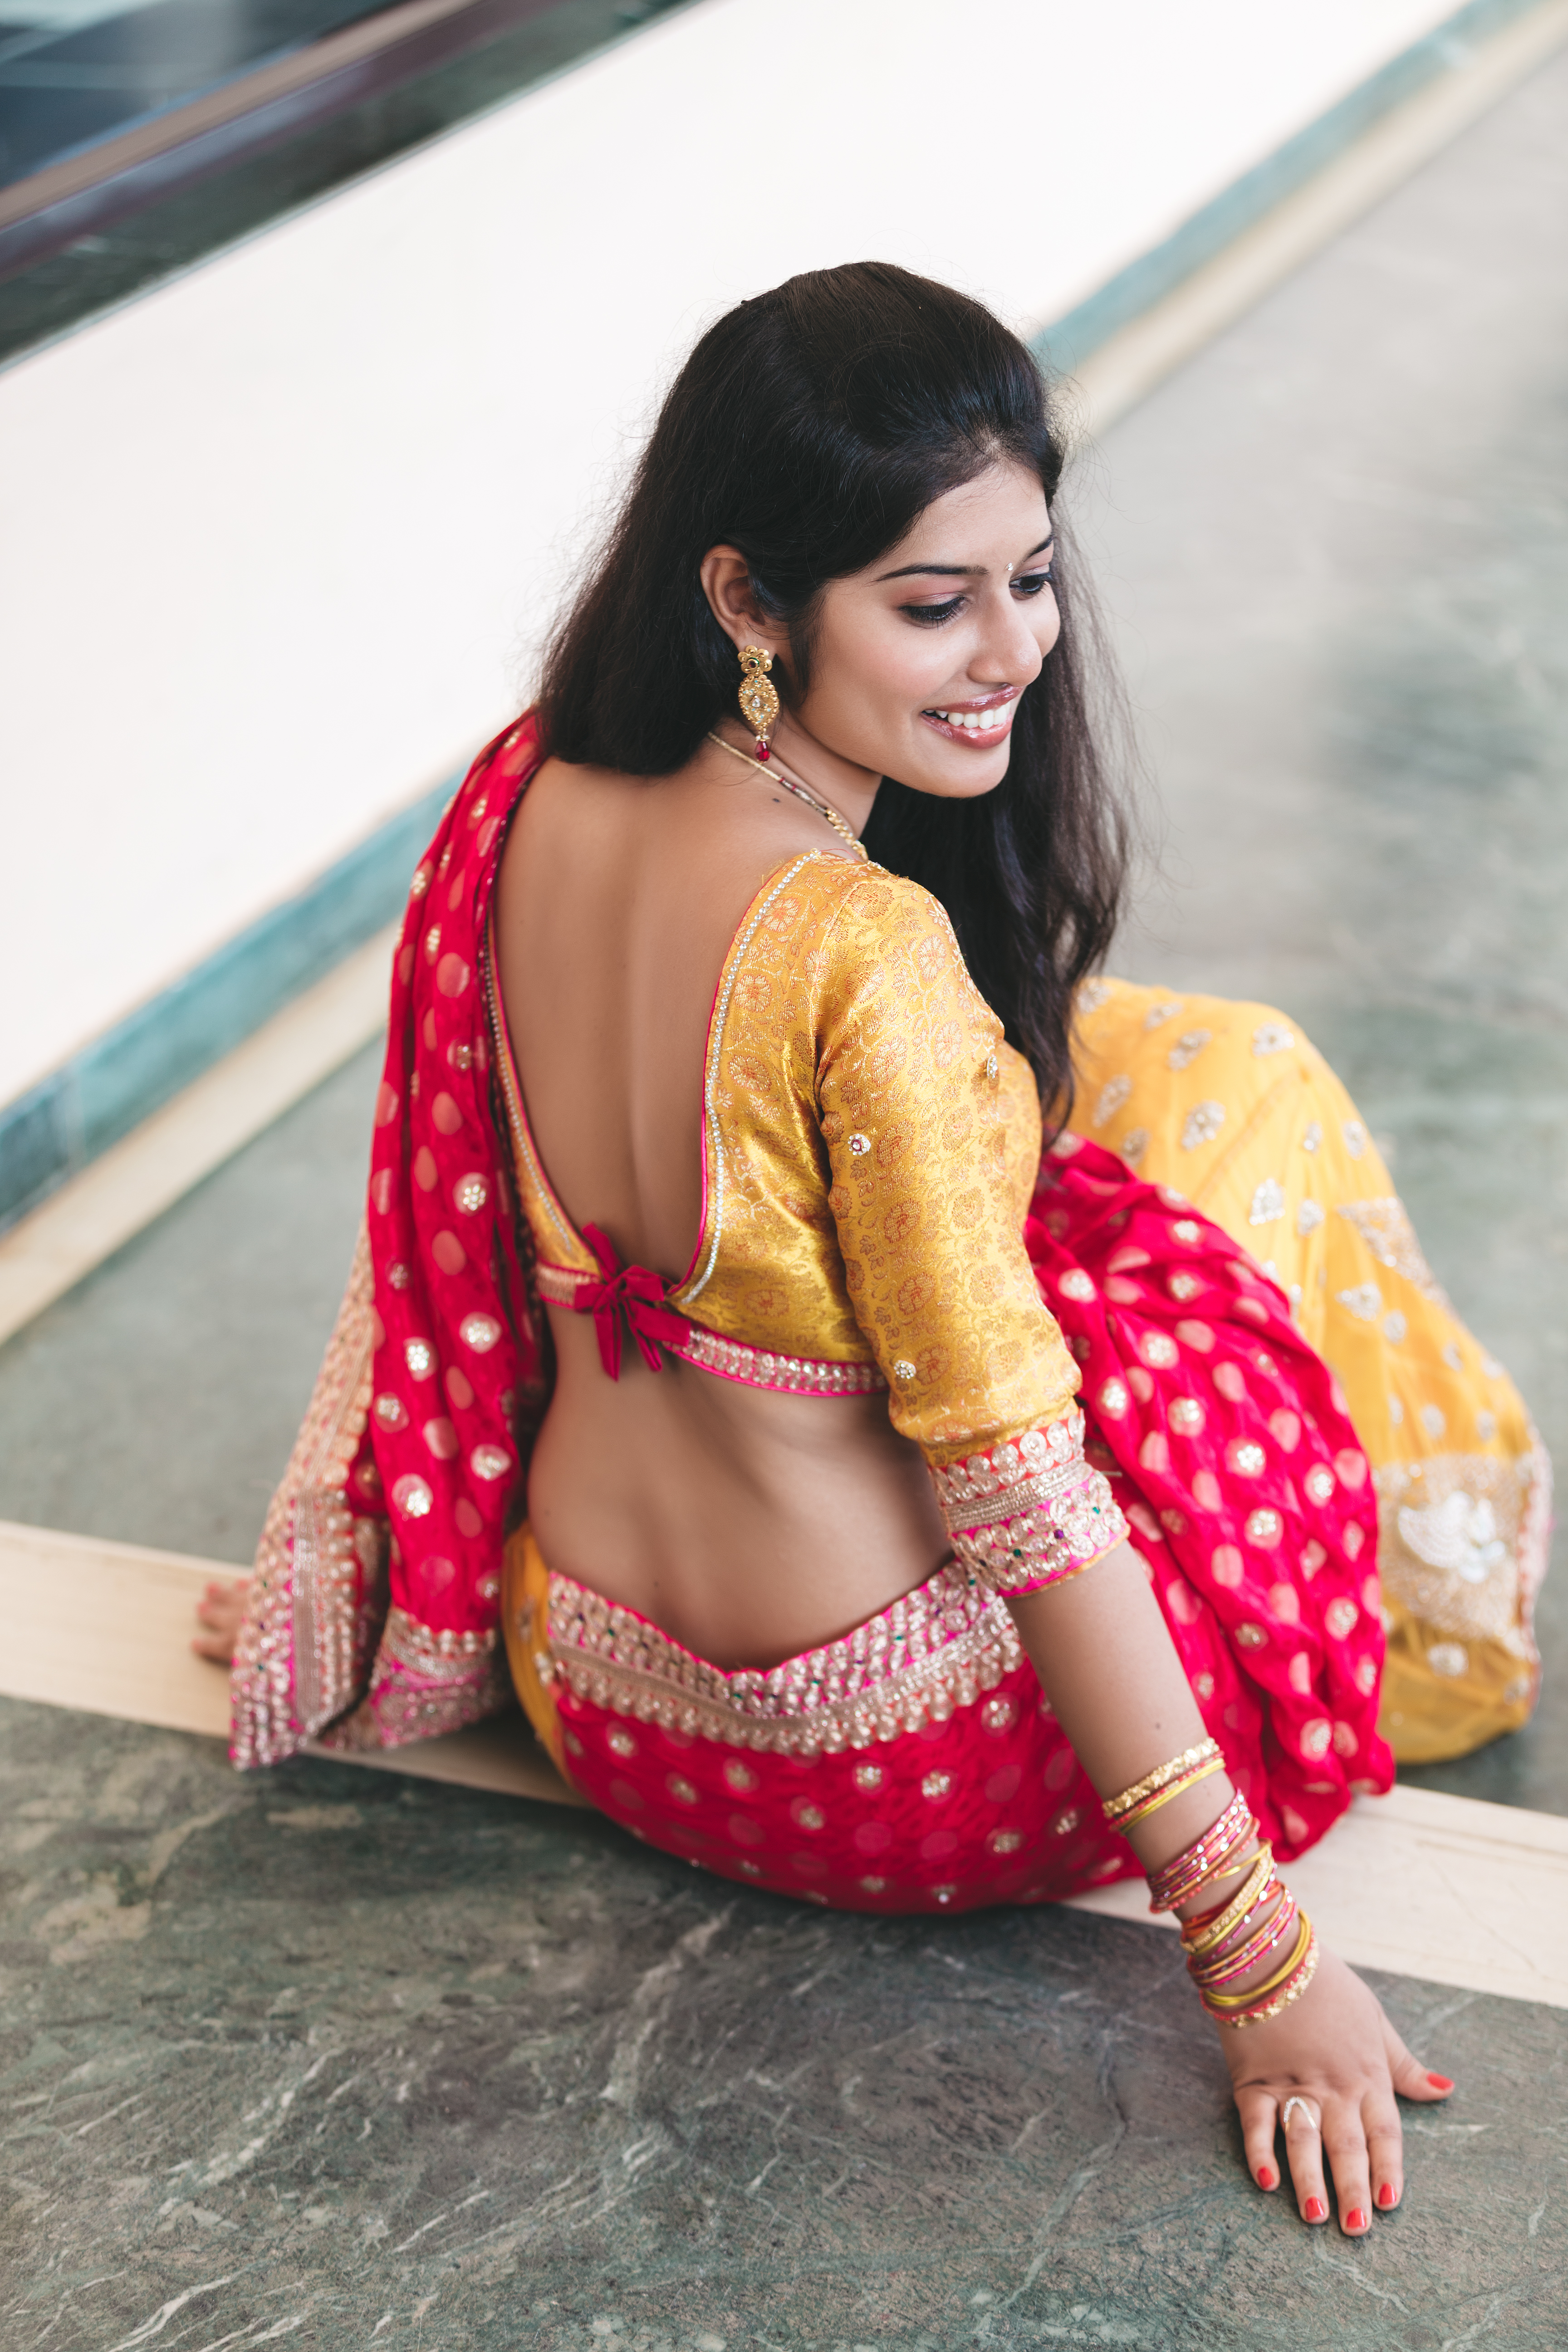 Why a saree is sexy? – BharatSthali